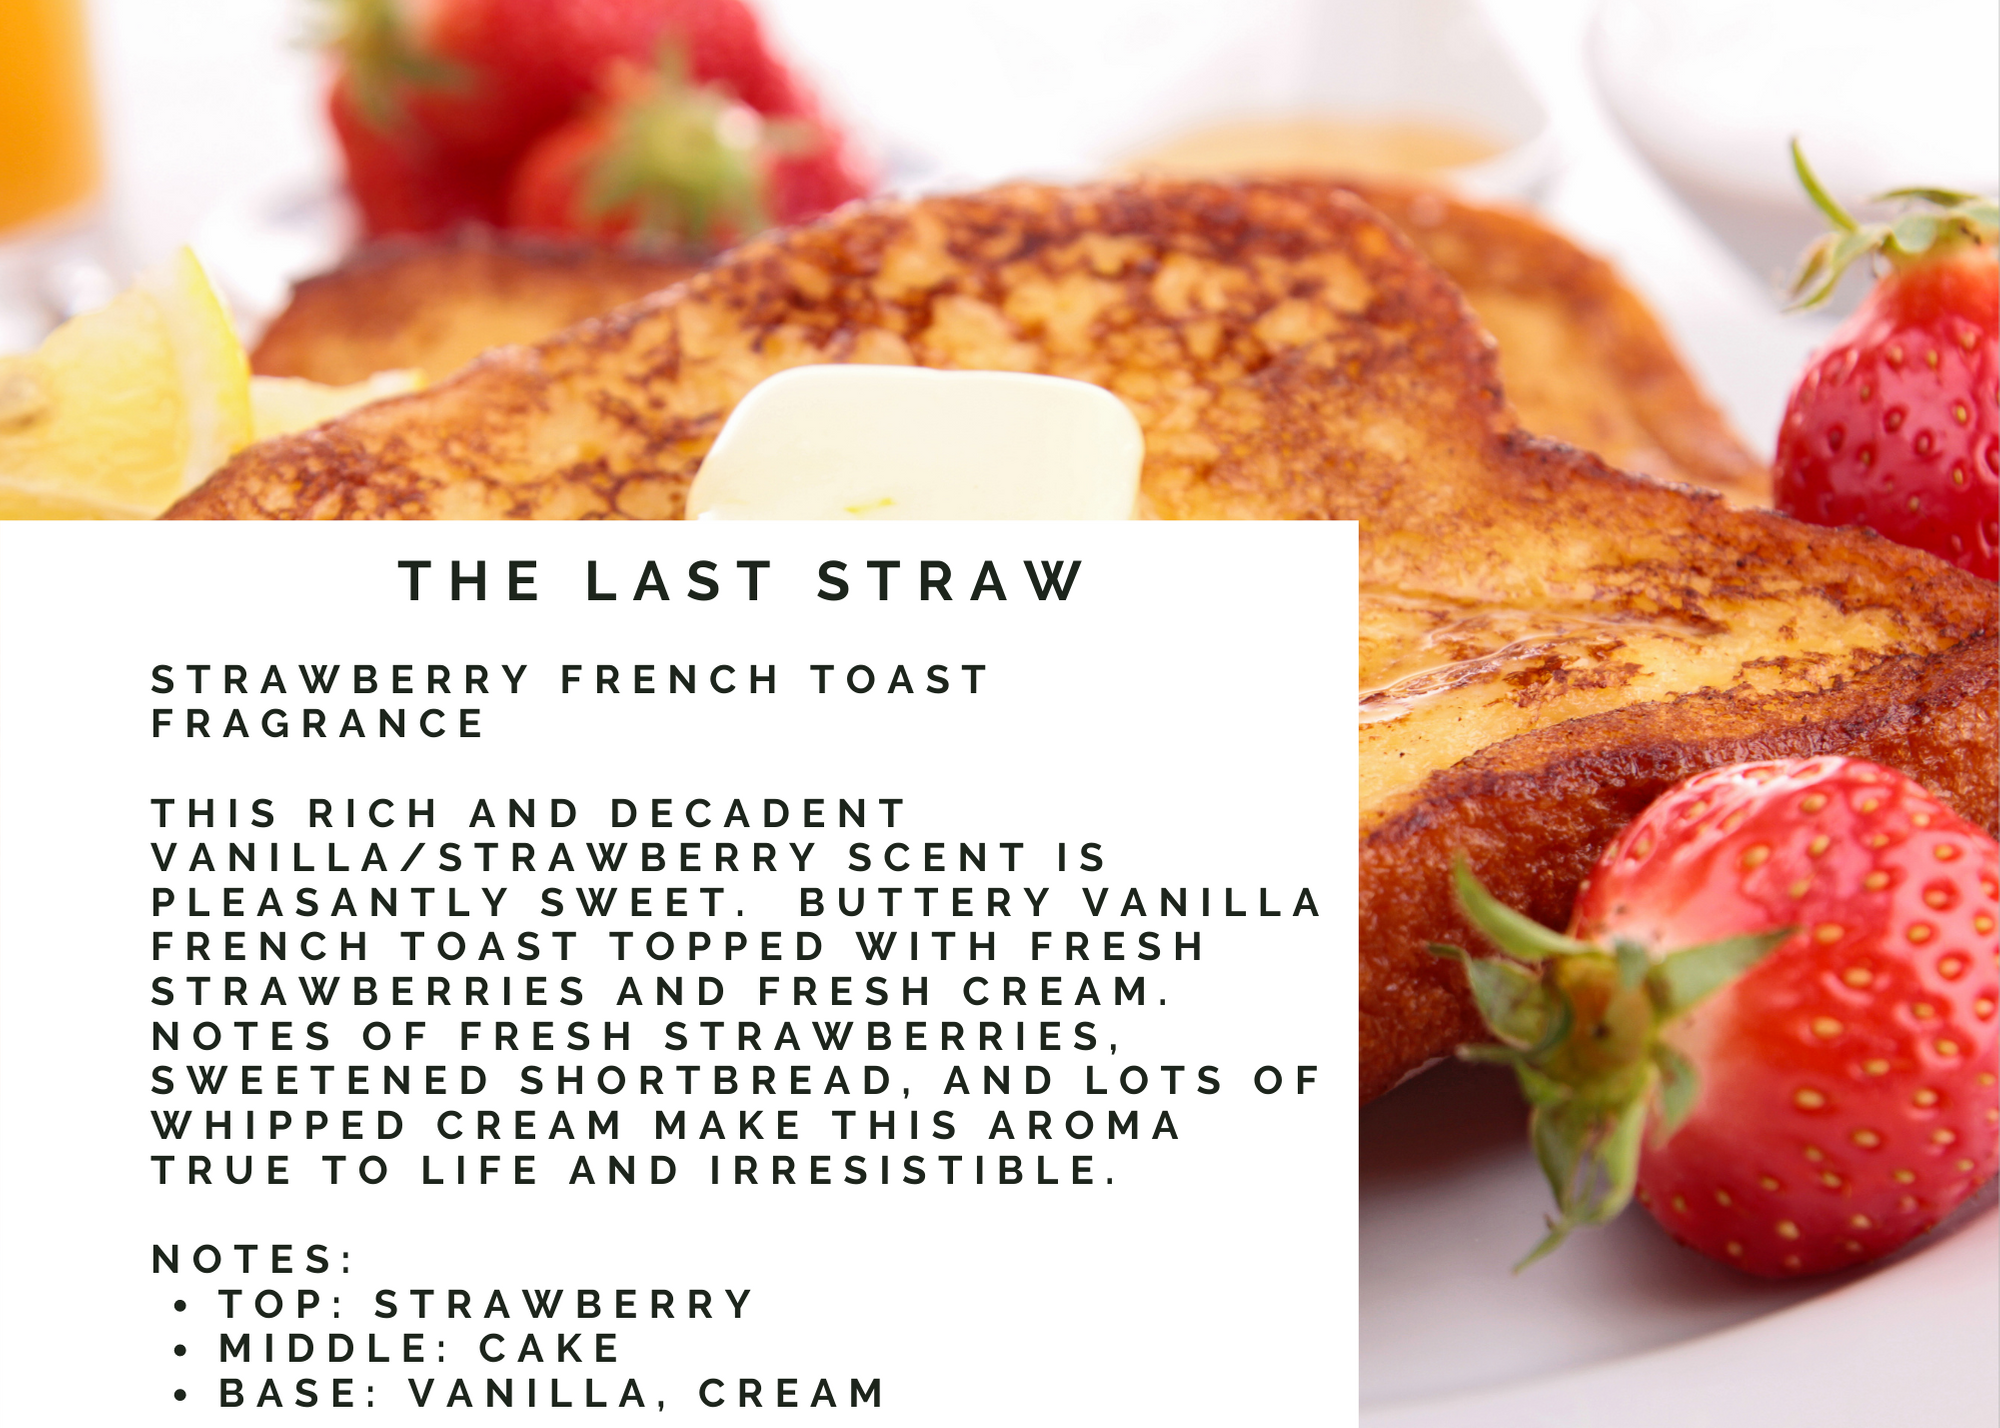 Lit Candlestick The Last Straw Strawberry French Toast Fragrance